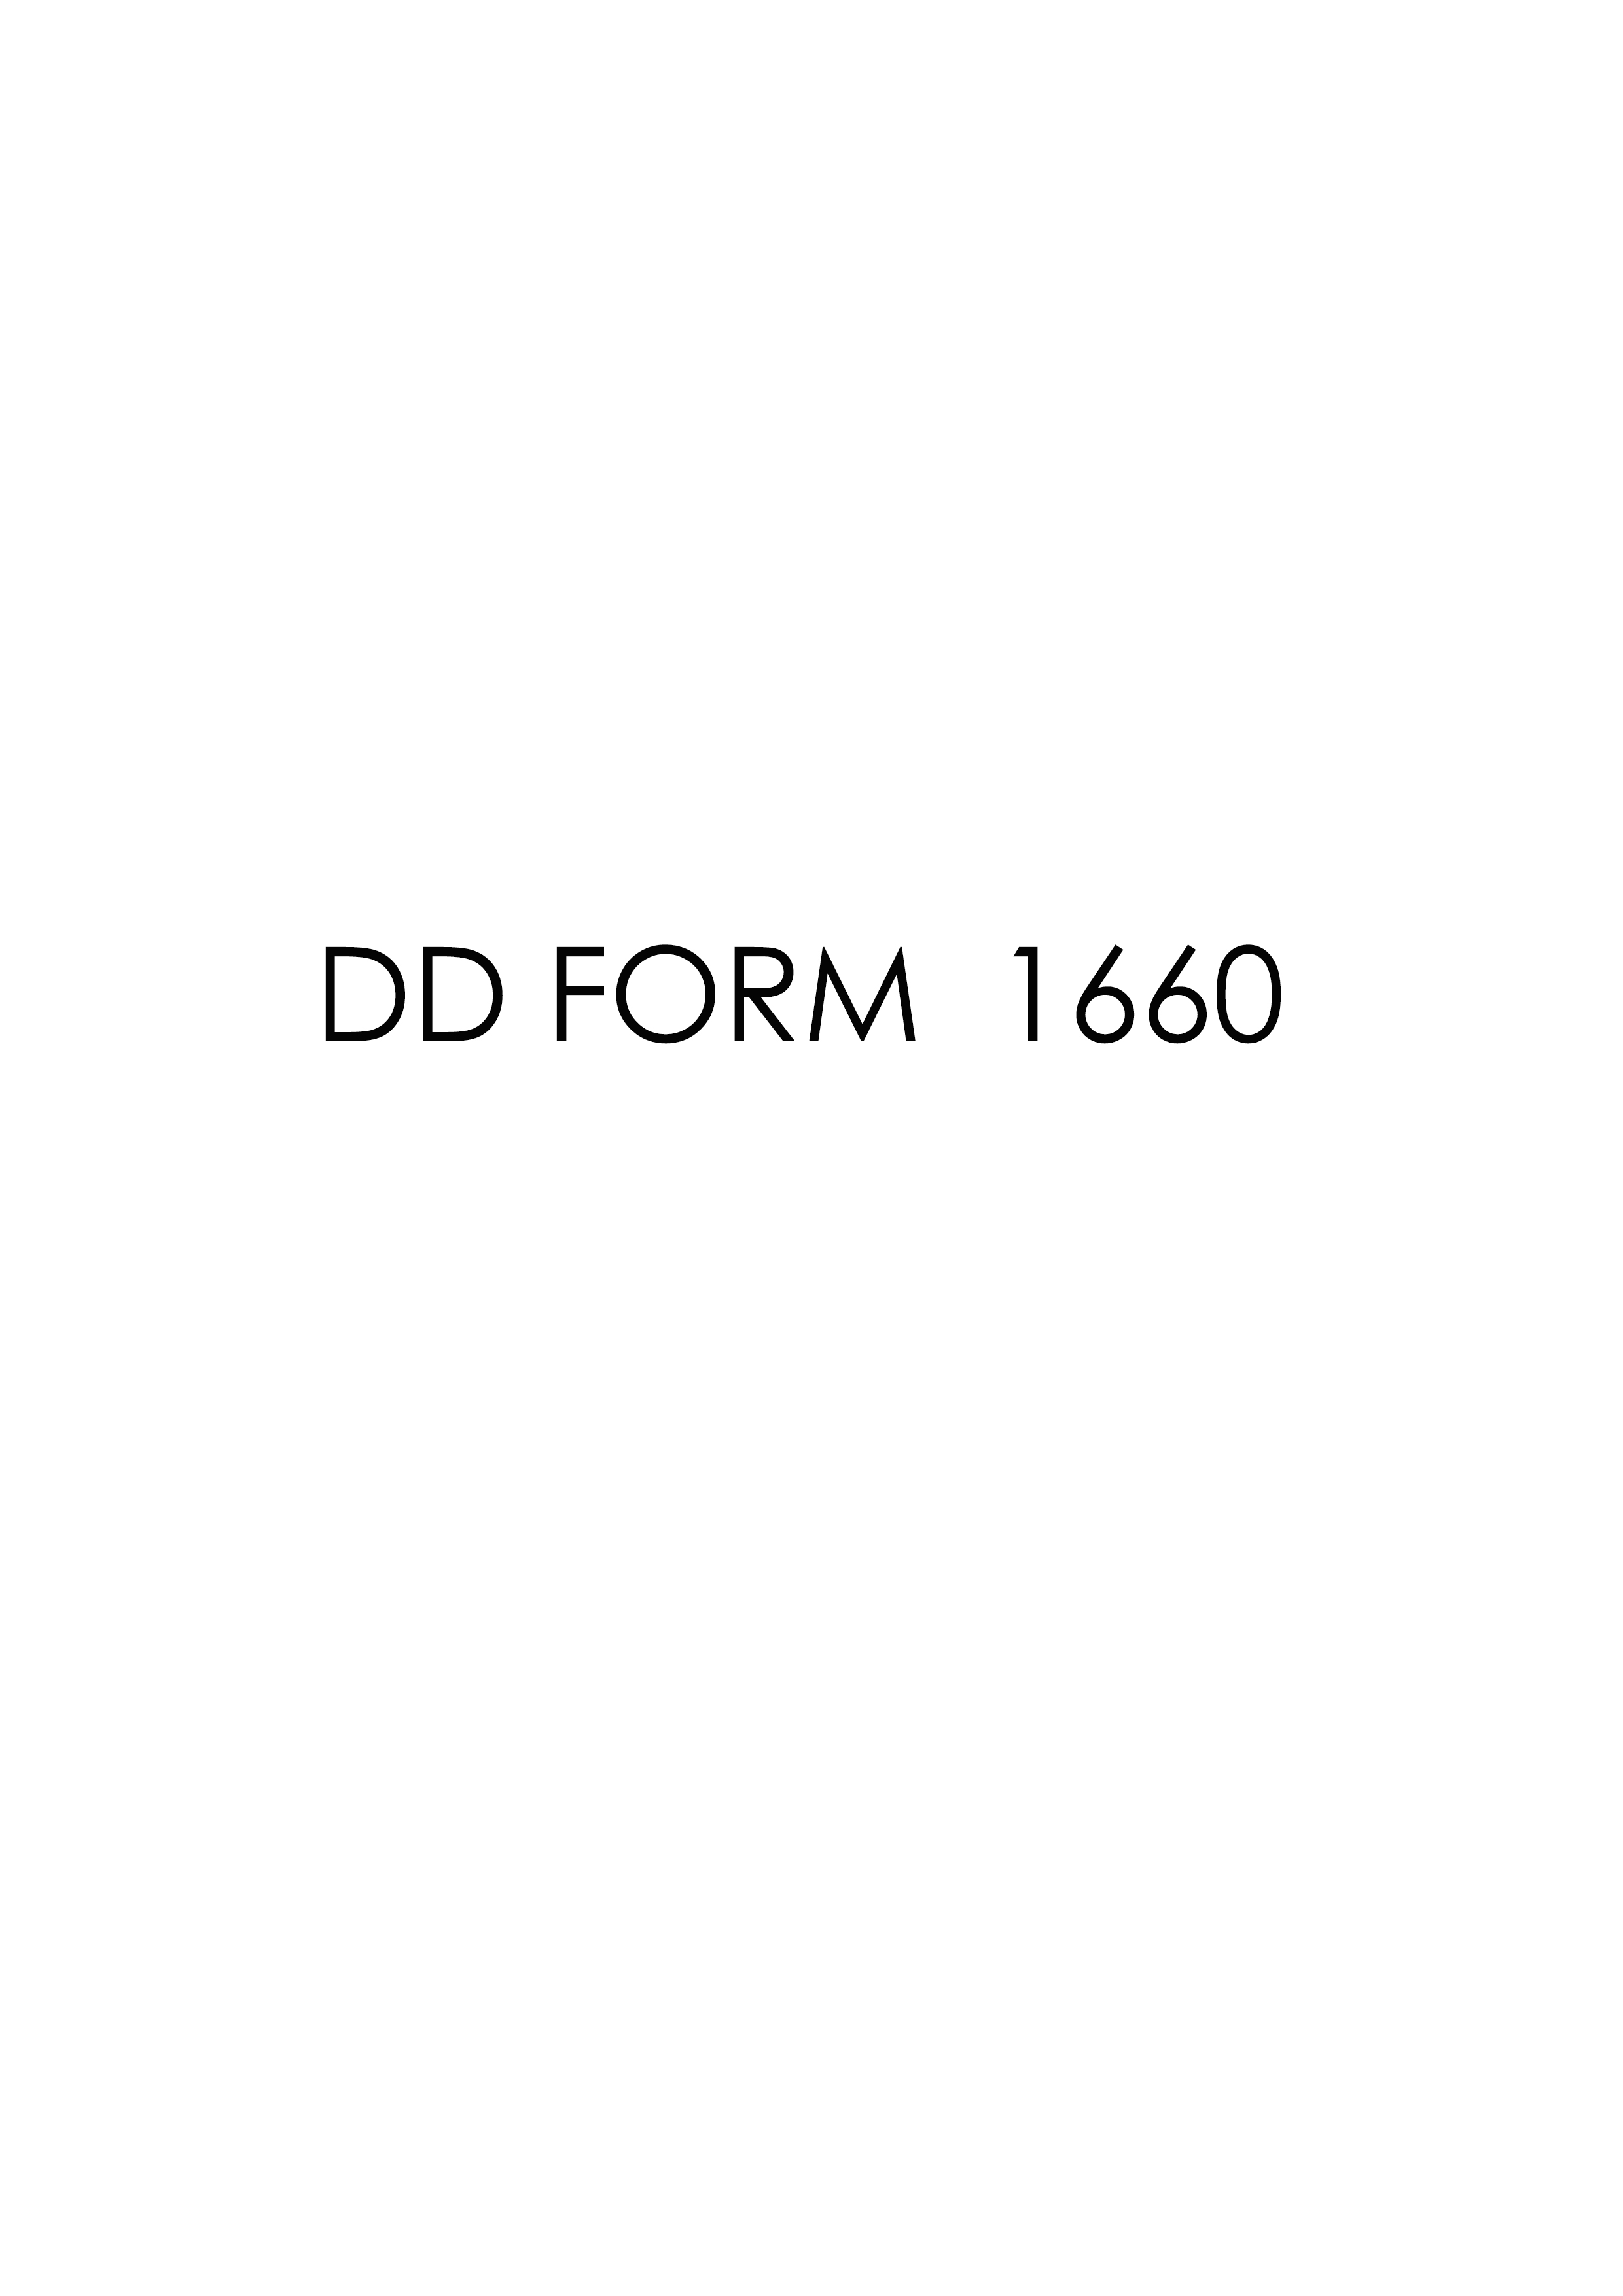 Download Fillable dd Form 1660